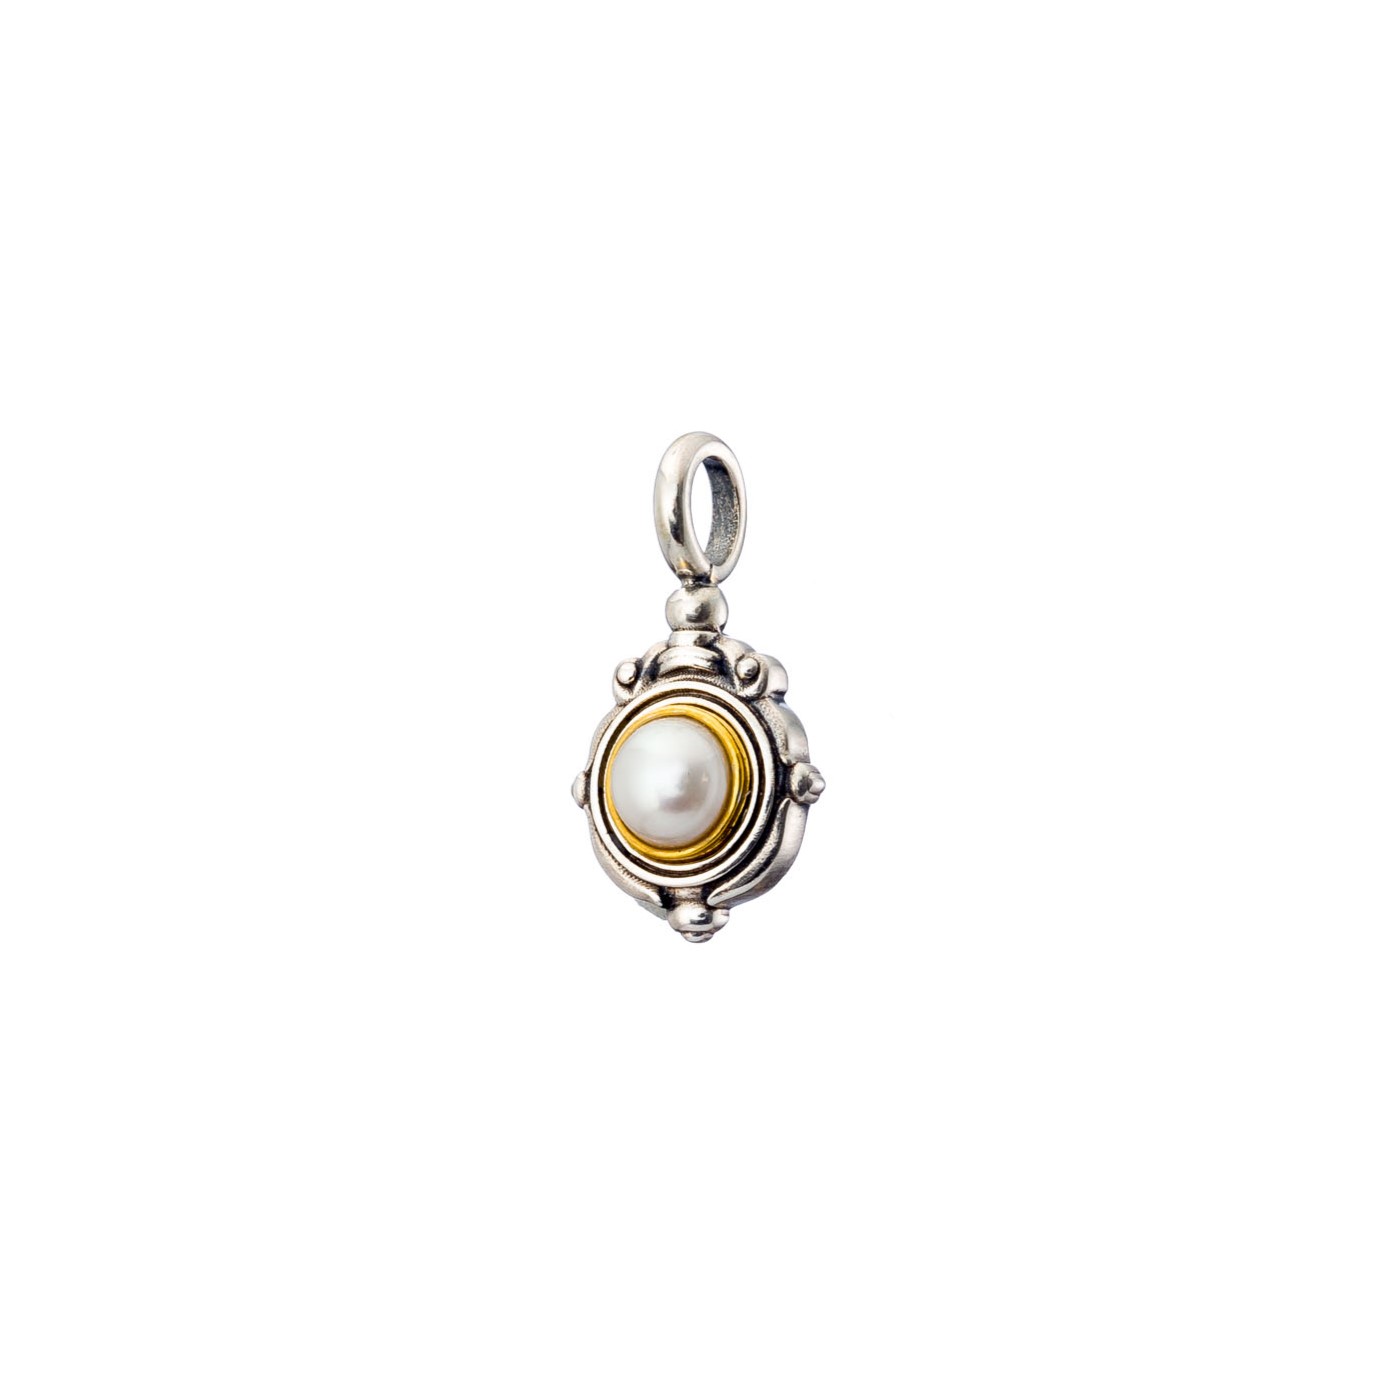 Semeli pendant in Sterling Silver with Gold Plated Parts